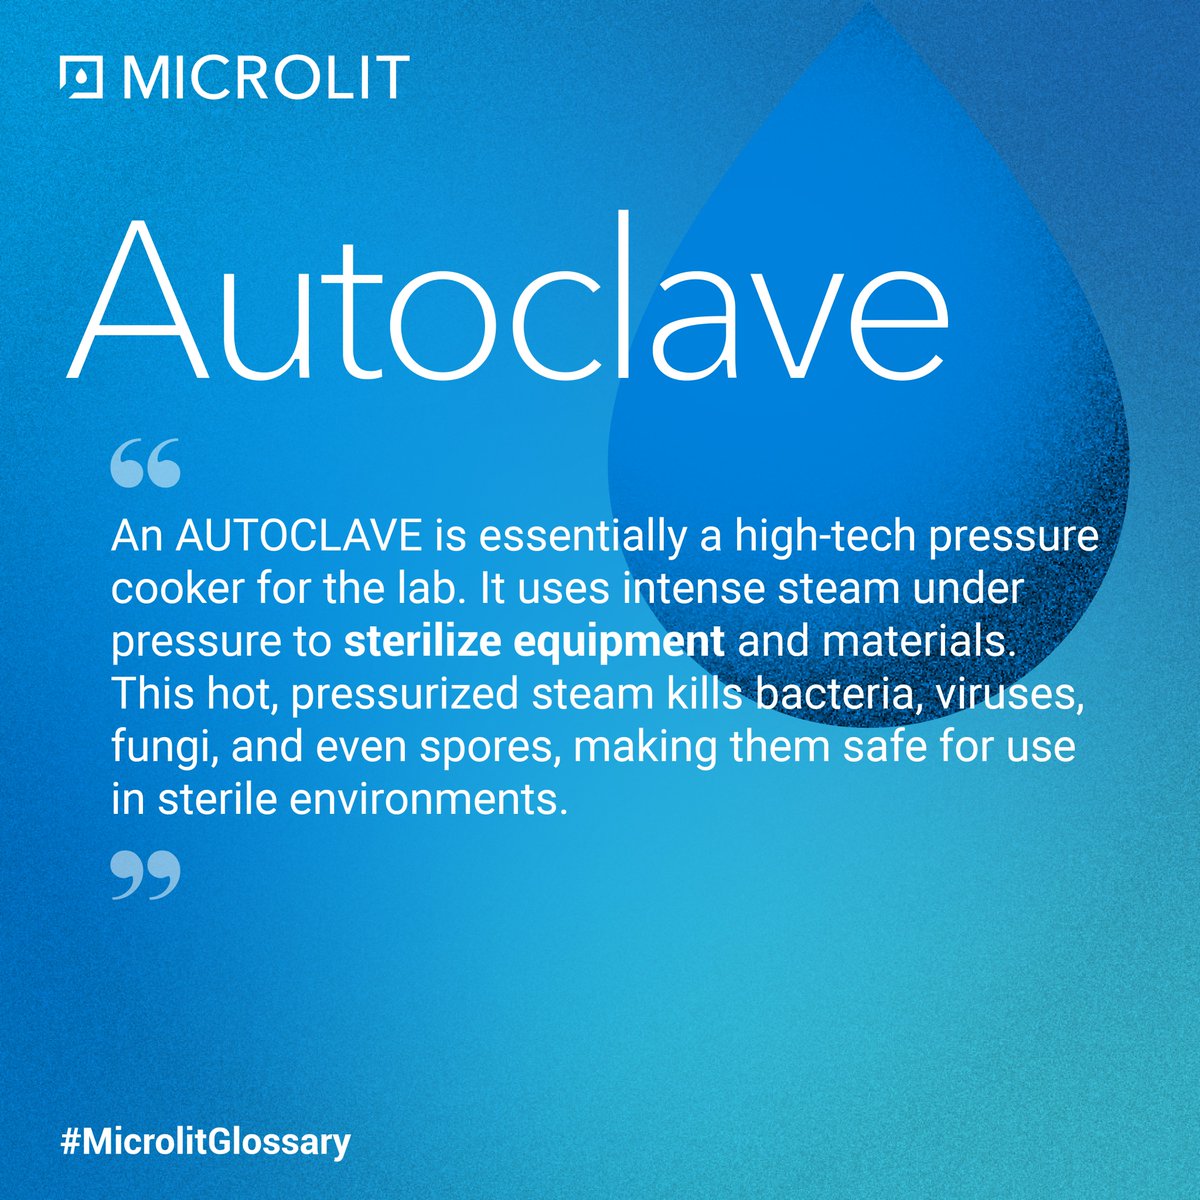 Discover how an autoclave transforms your lab into a sterile sanctuary, eliminating bacteria, viruses, fungi, and spores with intense pressure and heat.

#Glossary #Microlit #Autoclave #Glossary #ExperiencePrecision #EnablingInnovations #AccuracyMatters